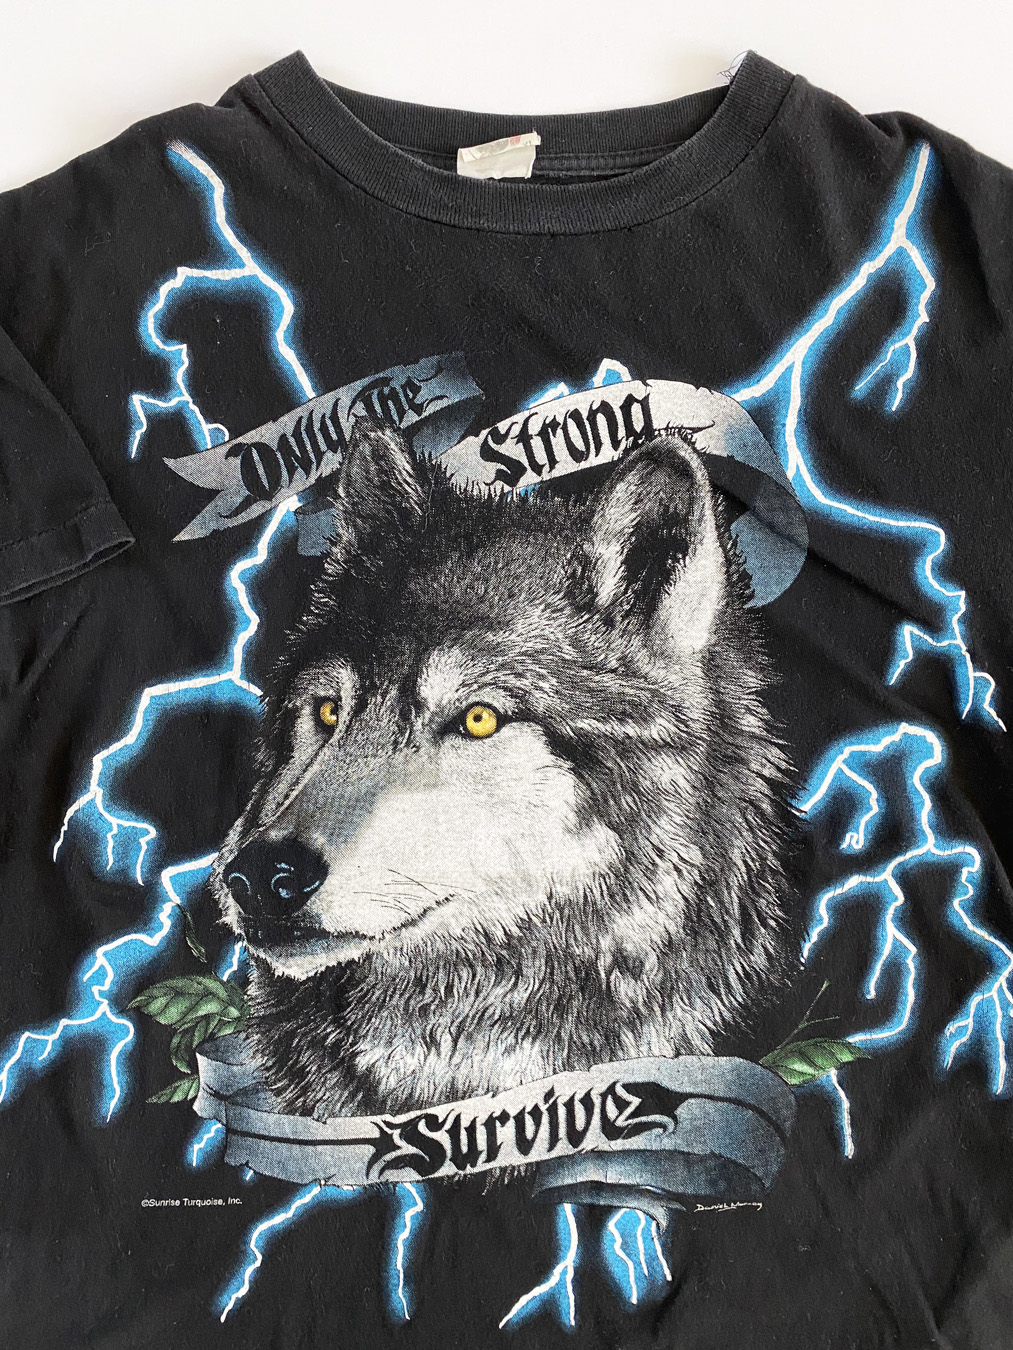 90s American Thunder 'Only The Strong Survive' Lightning T-Shirt